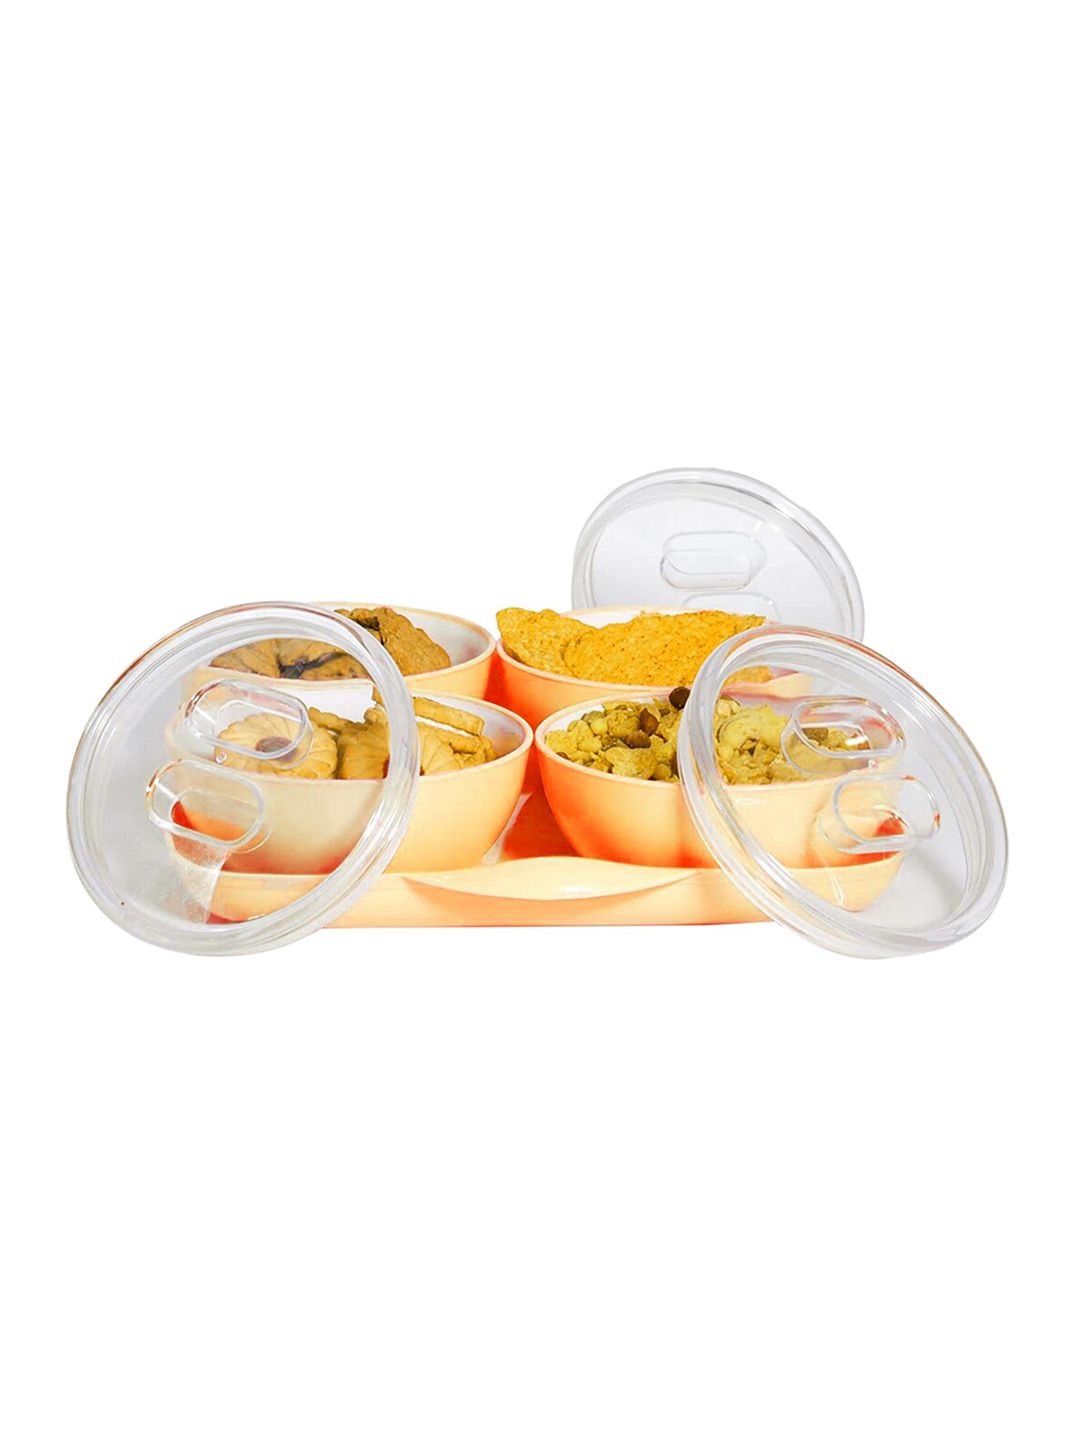 Kuber Industries Set Of 4 Orange Solid Bowls & 1 Tray With Silicon Rubberized Ring Lid Price in India